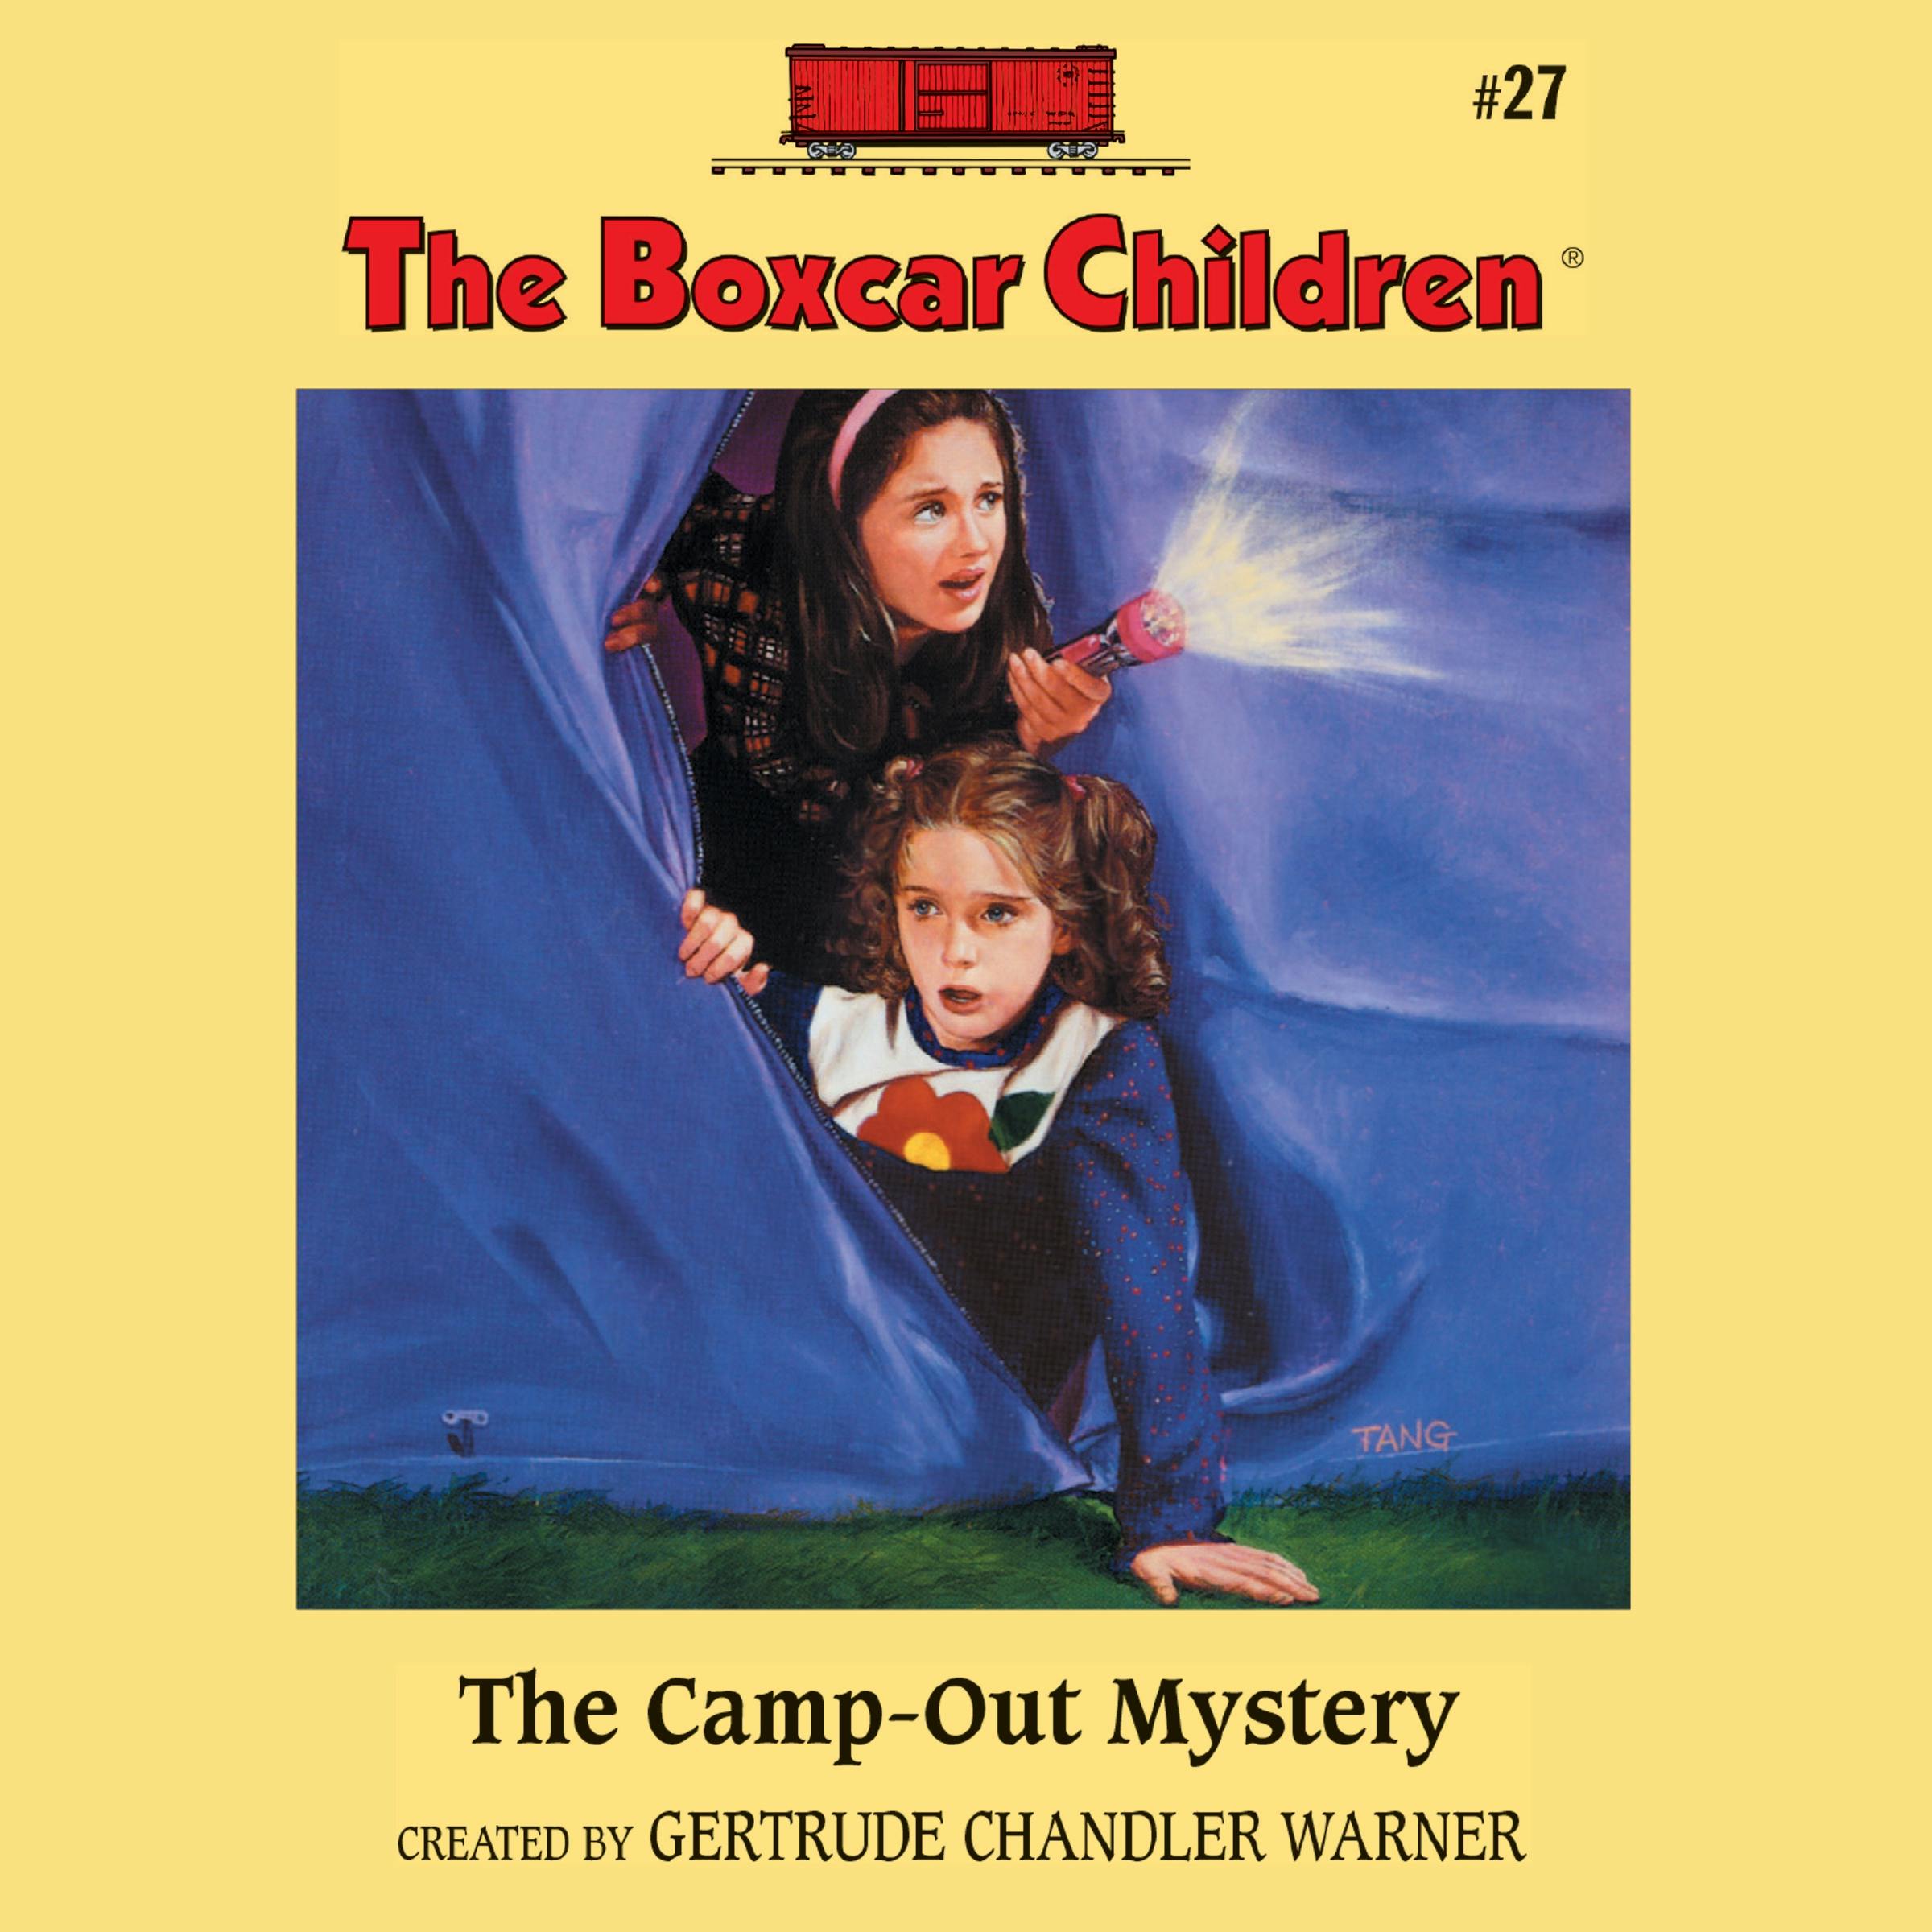 The Camp-Out Mystery - Gertrude Chandler Warner